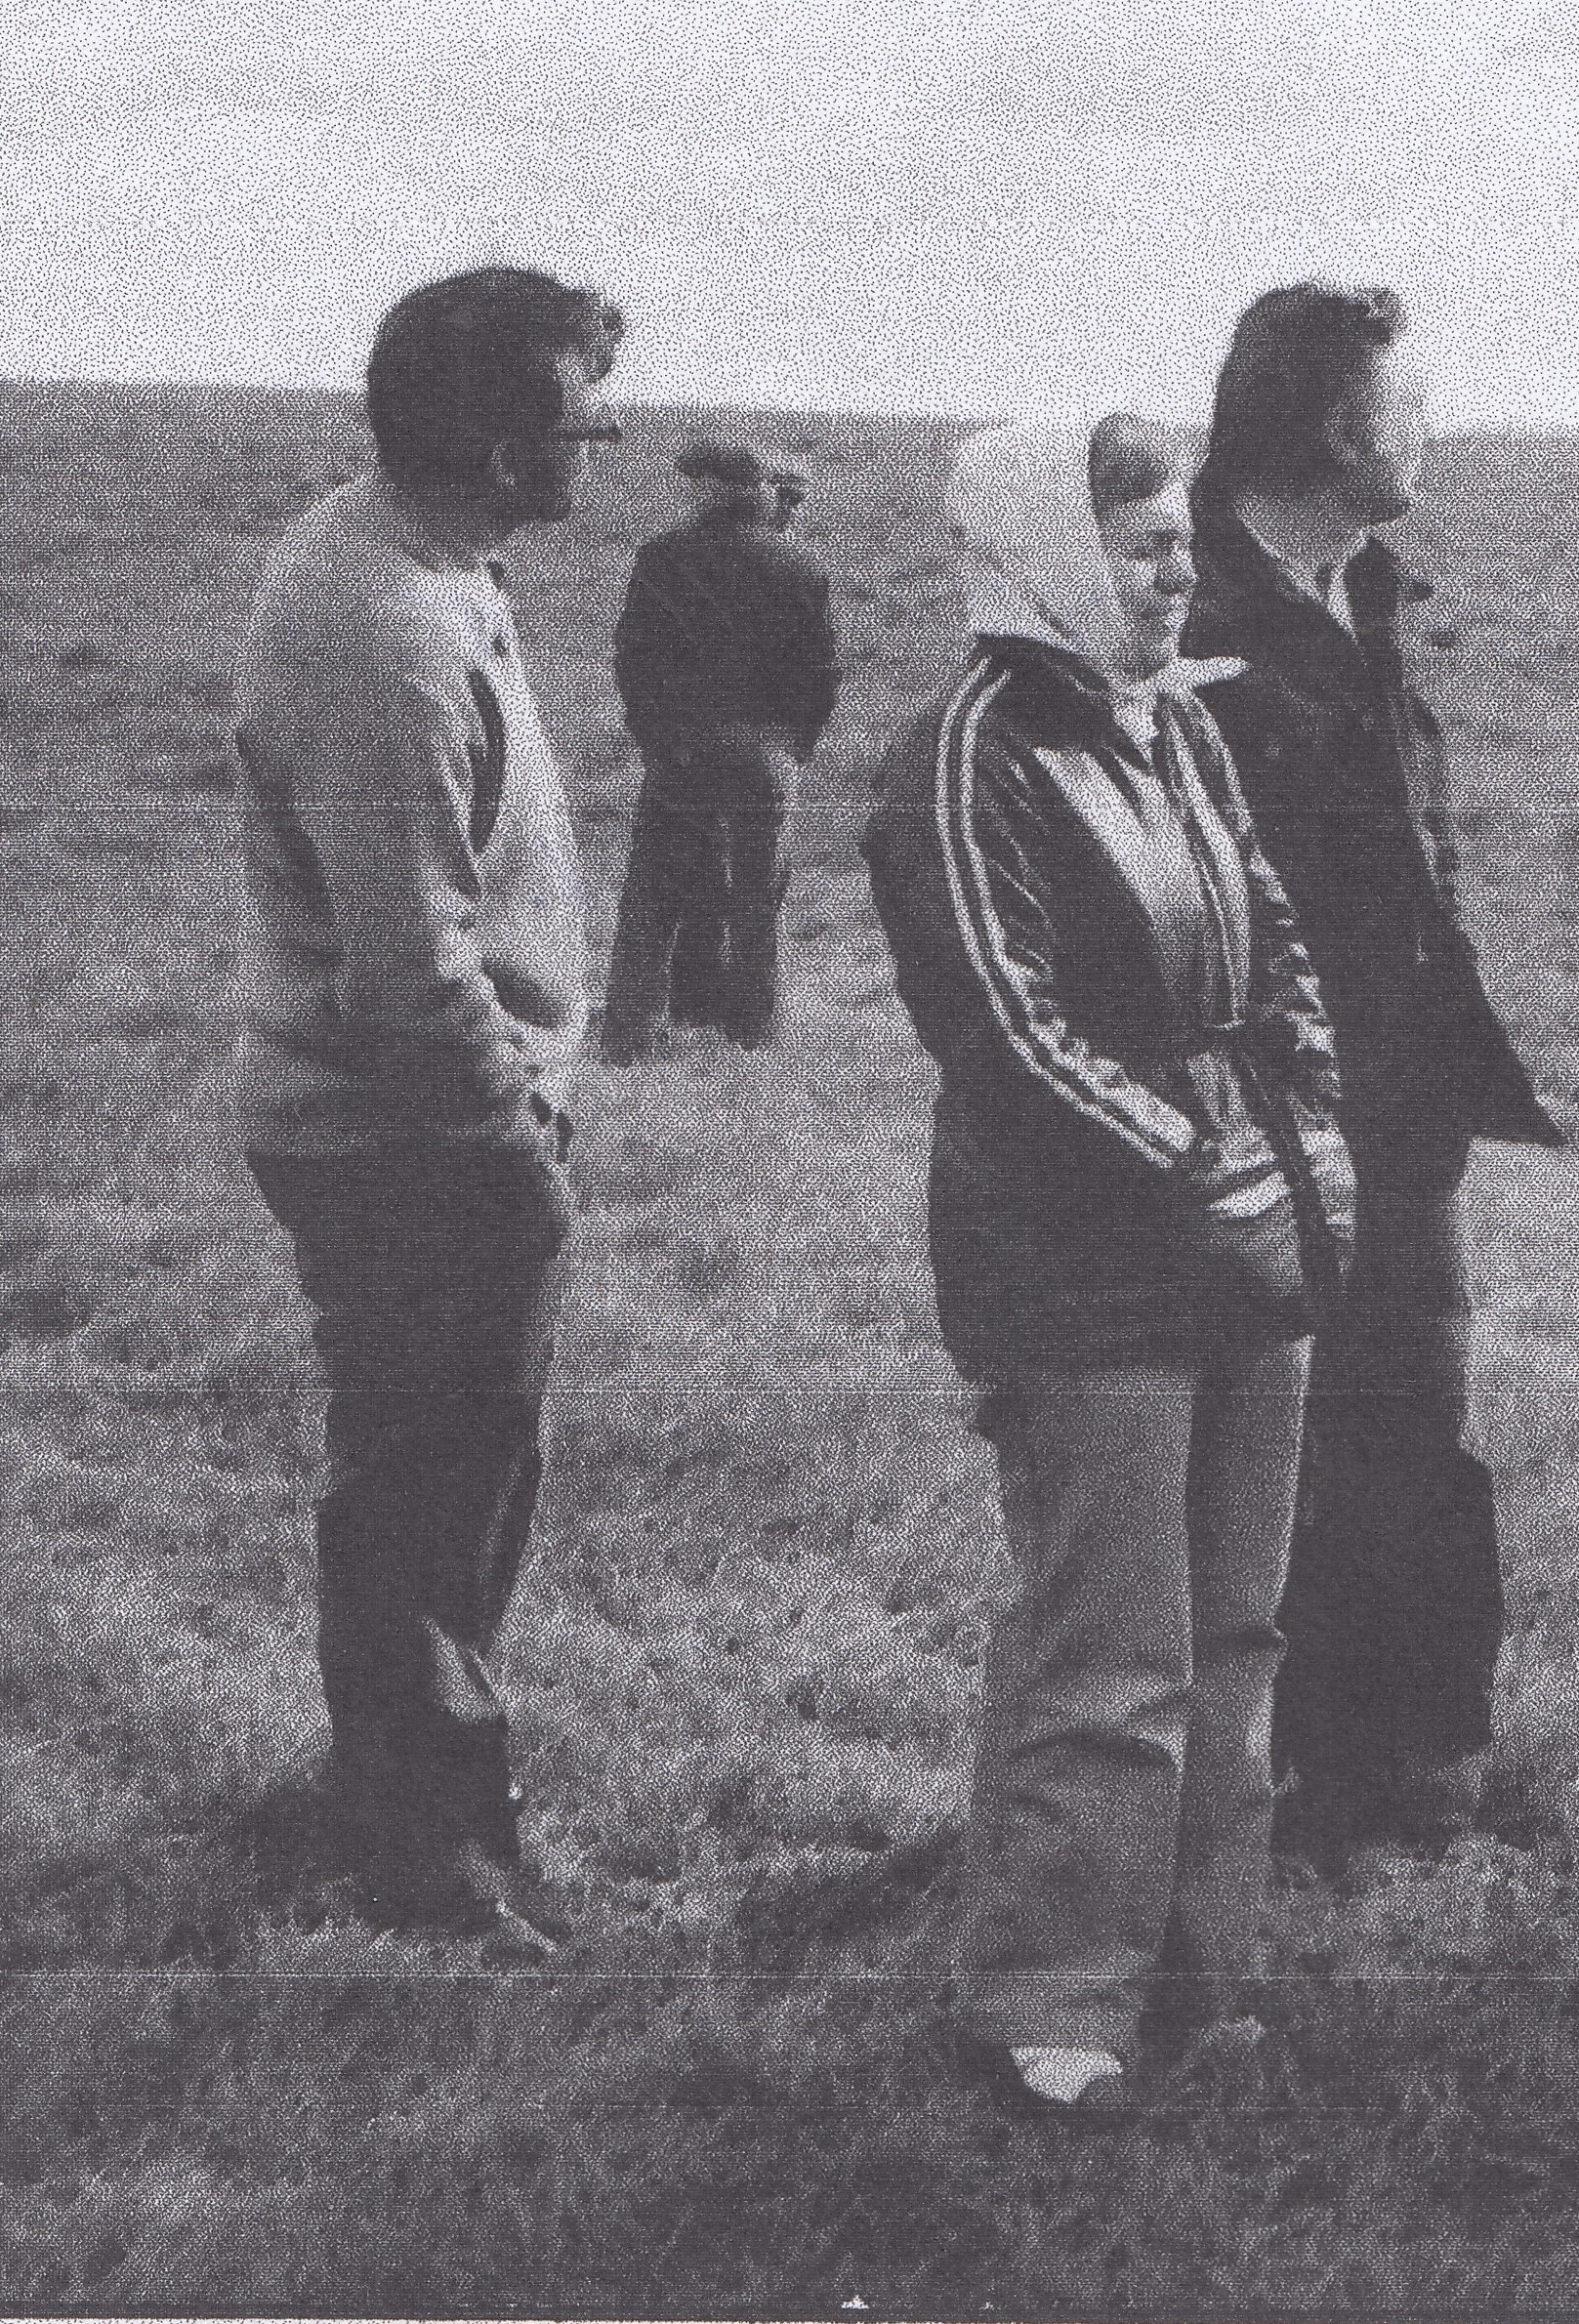 Kamil Lhoták the younger, far left. Photograph from the 1970's